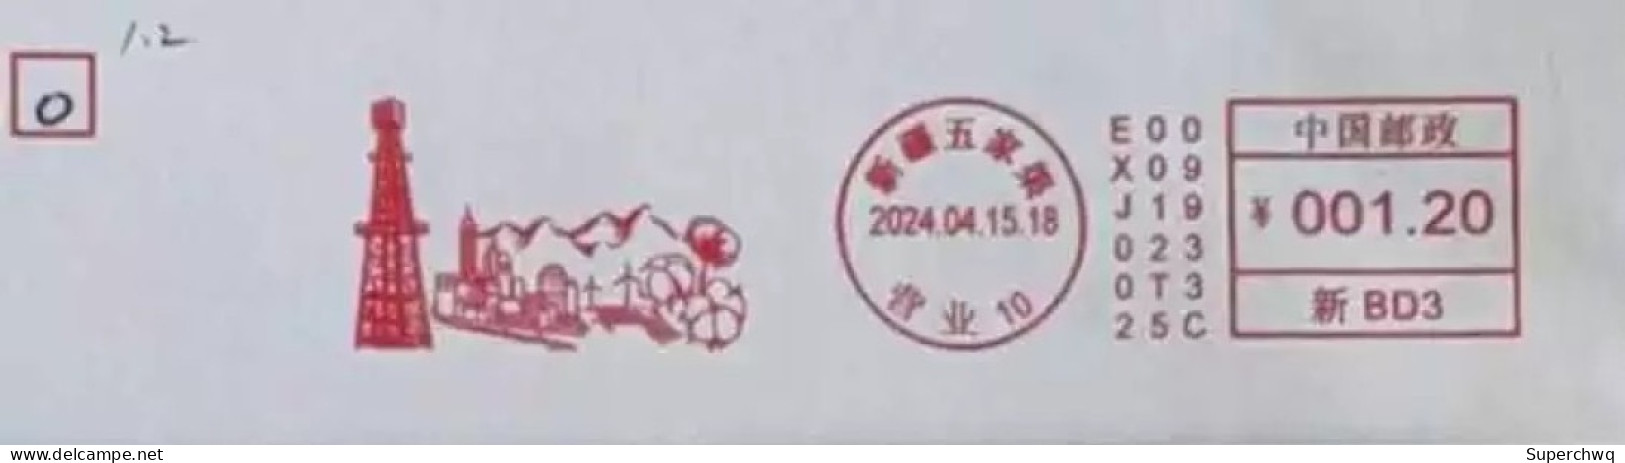 China Posted Cover，Cotton Postage Machine Stamp - Covers